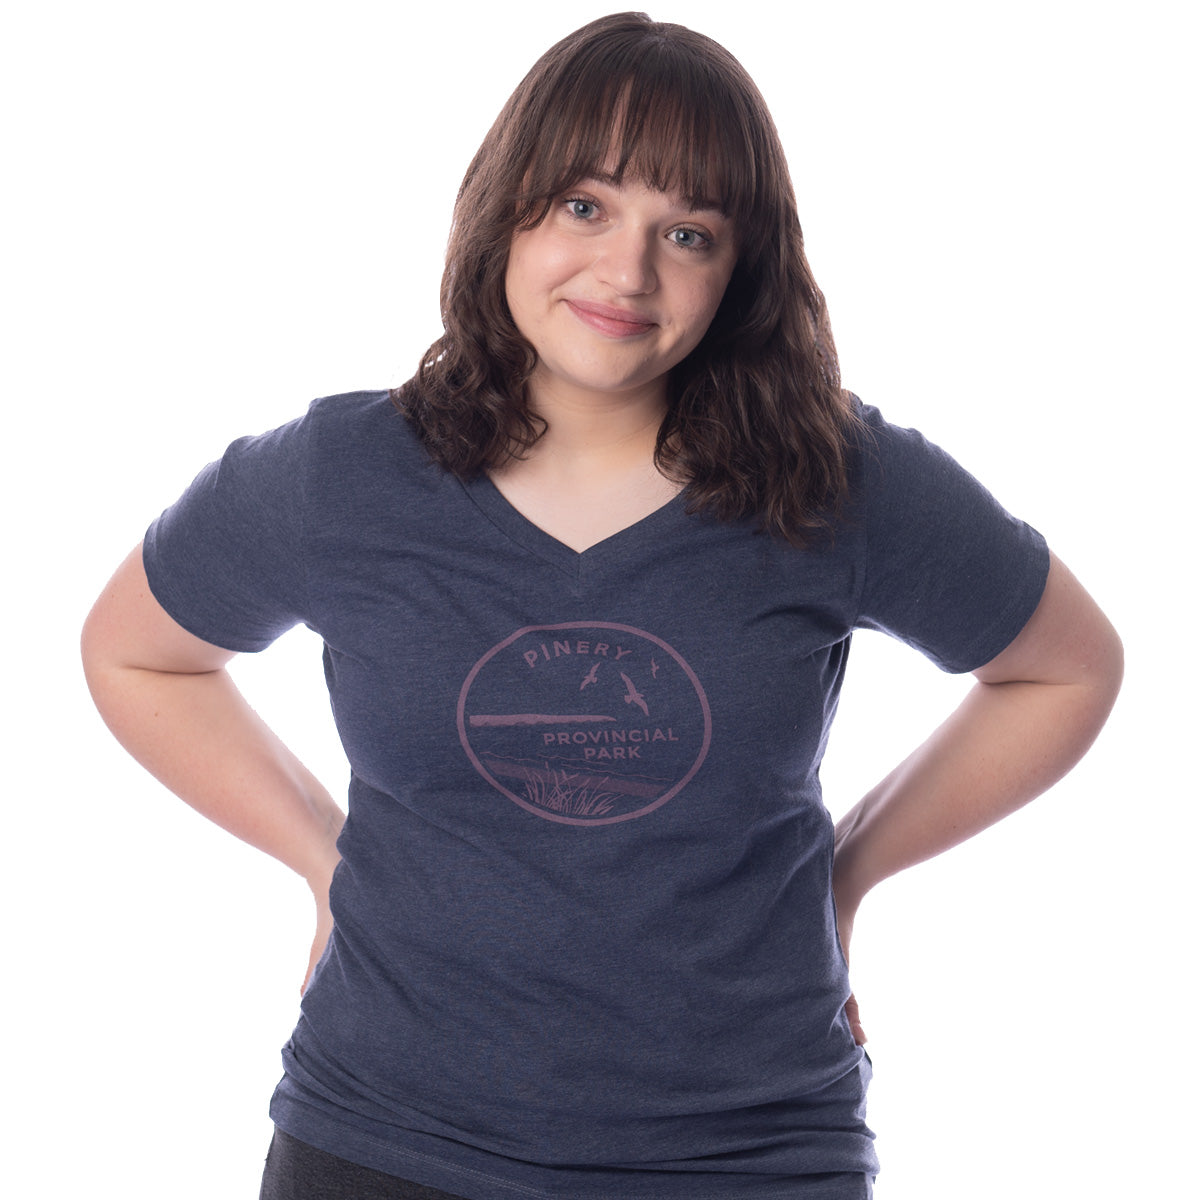 Female wearing heather navy Ladies Fit Park Specific T-shirt V-neck. Pink Pinery park crest on centre chest.